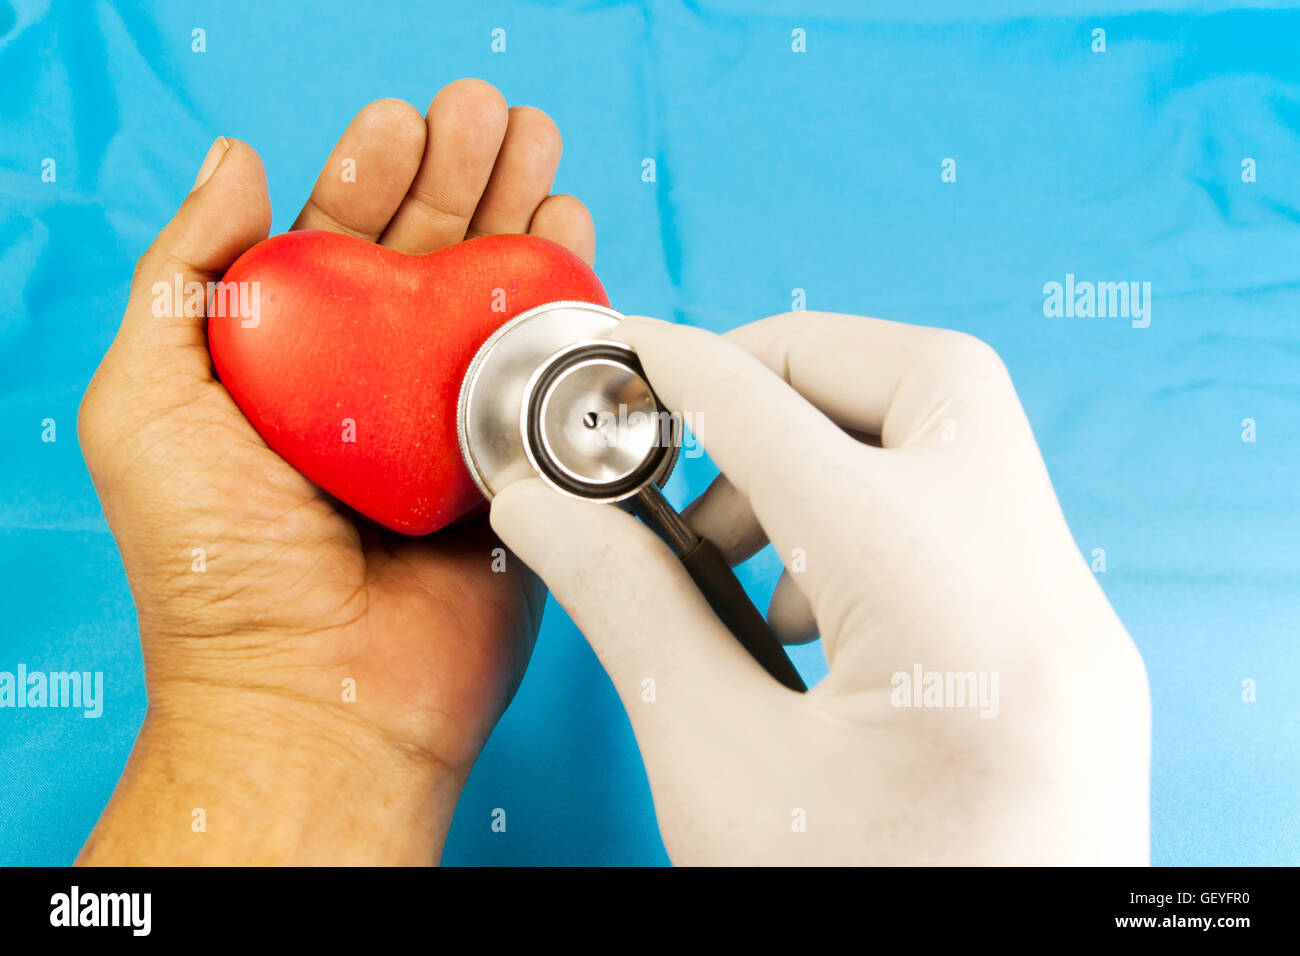 heart check up by stethoscope. red heart shape in hand on blue fabric background. Stock Photo